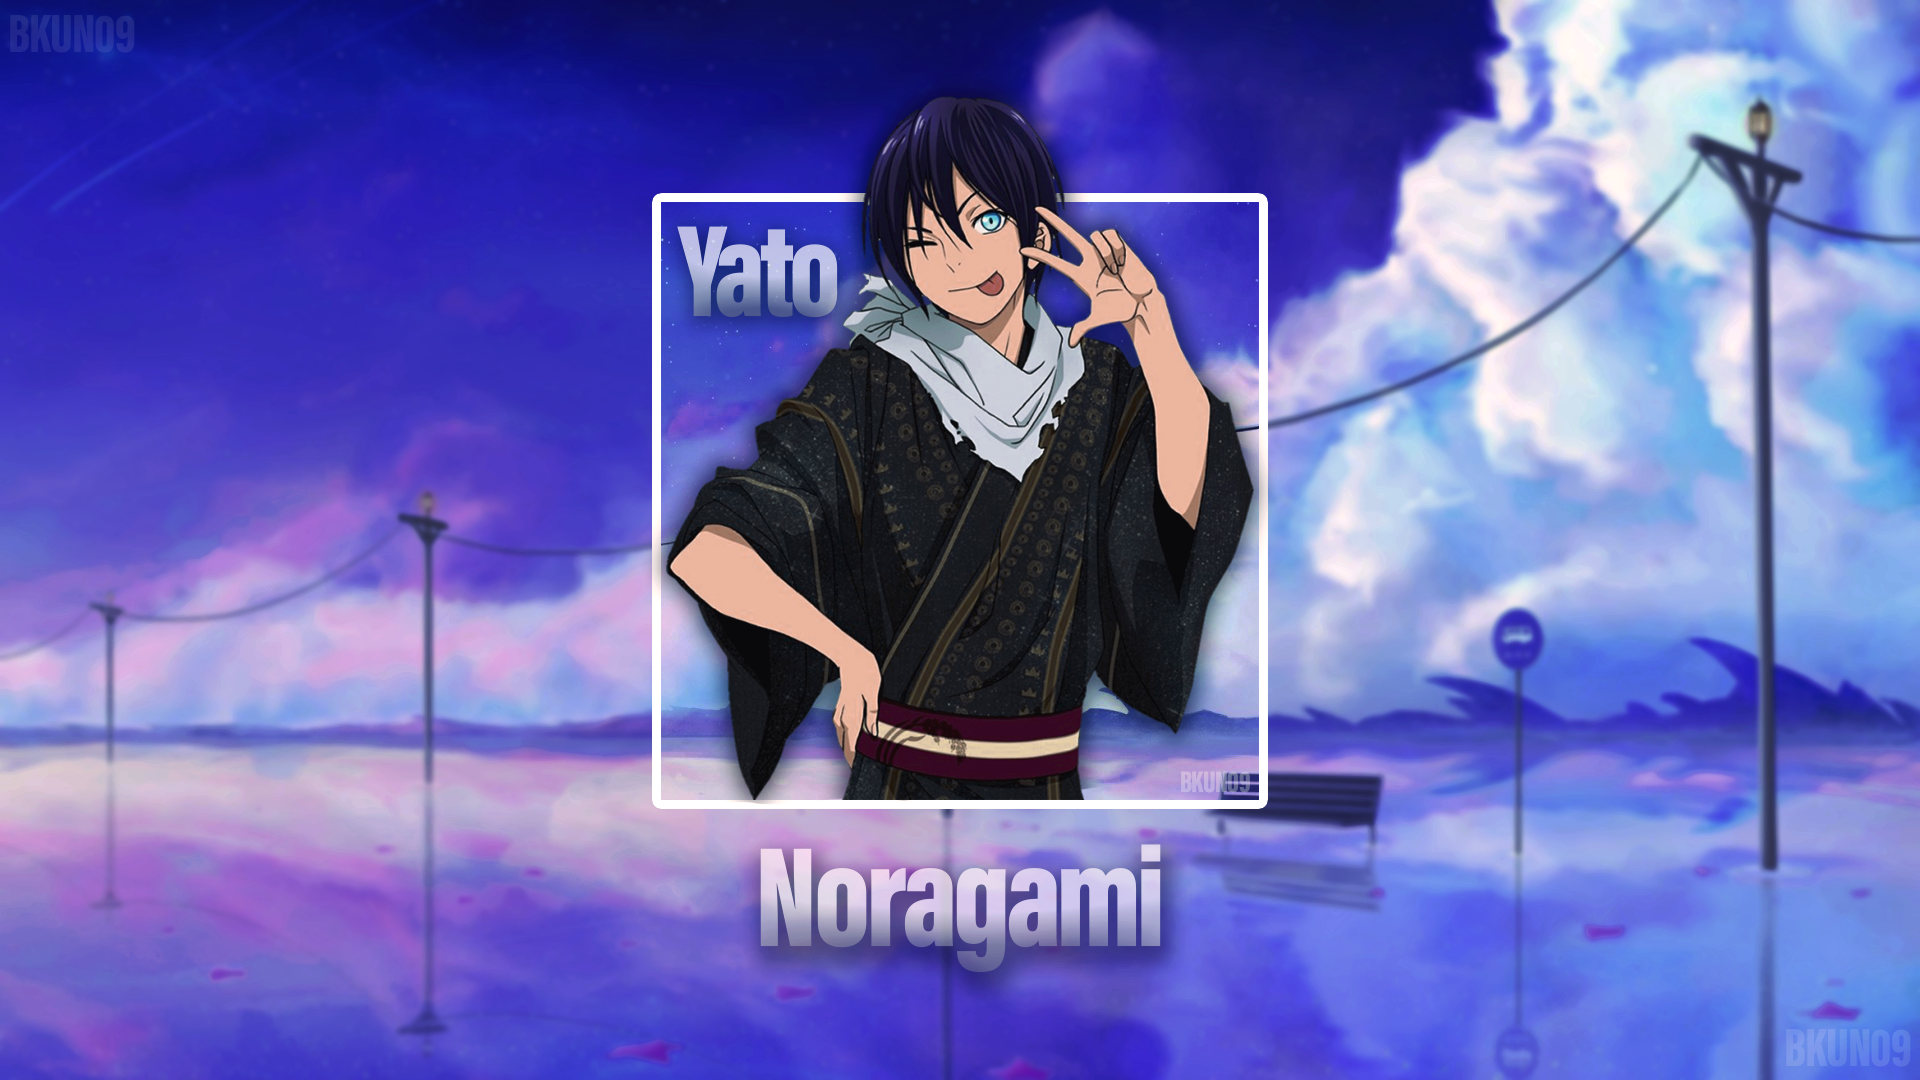 Anime 1920x1080 anime boys anime Noragami picture-in-picture tongue out Yato (Noragami) clouds bench